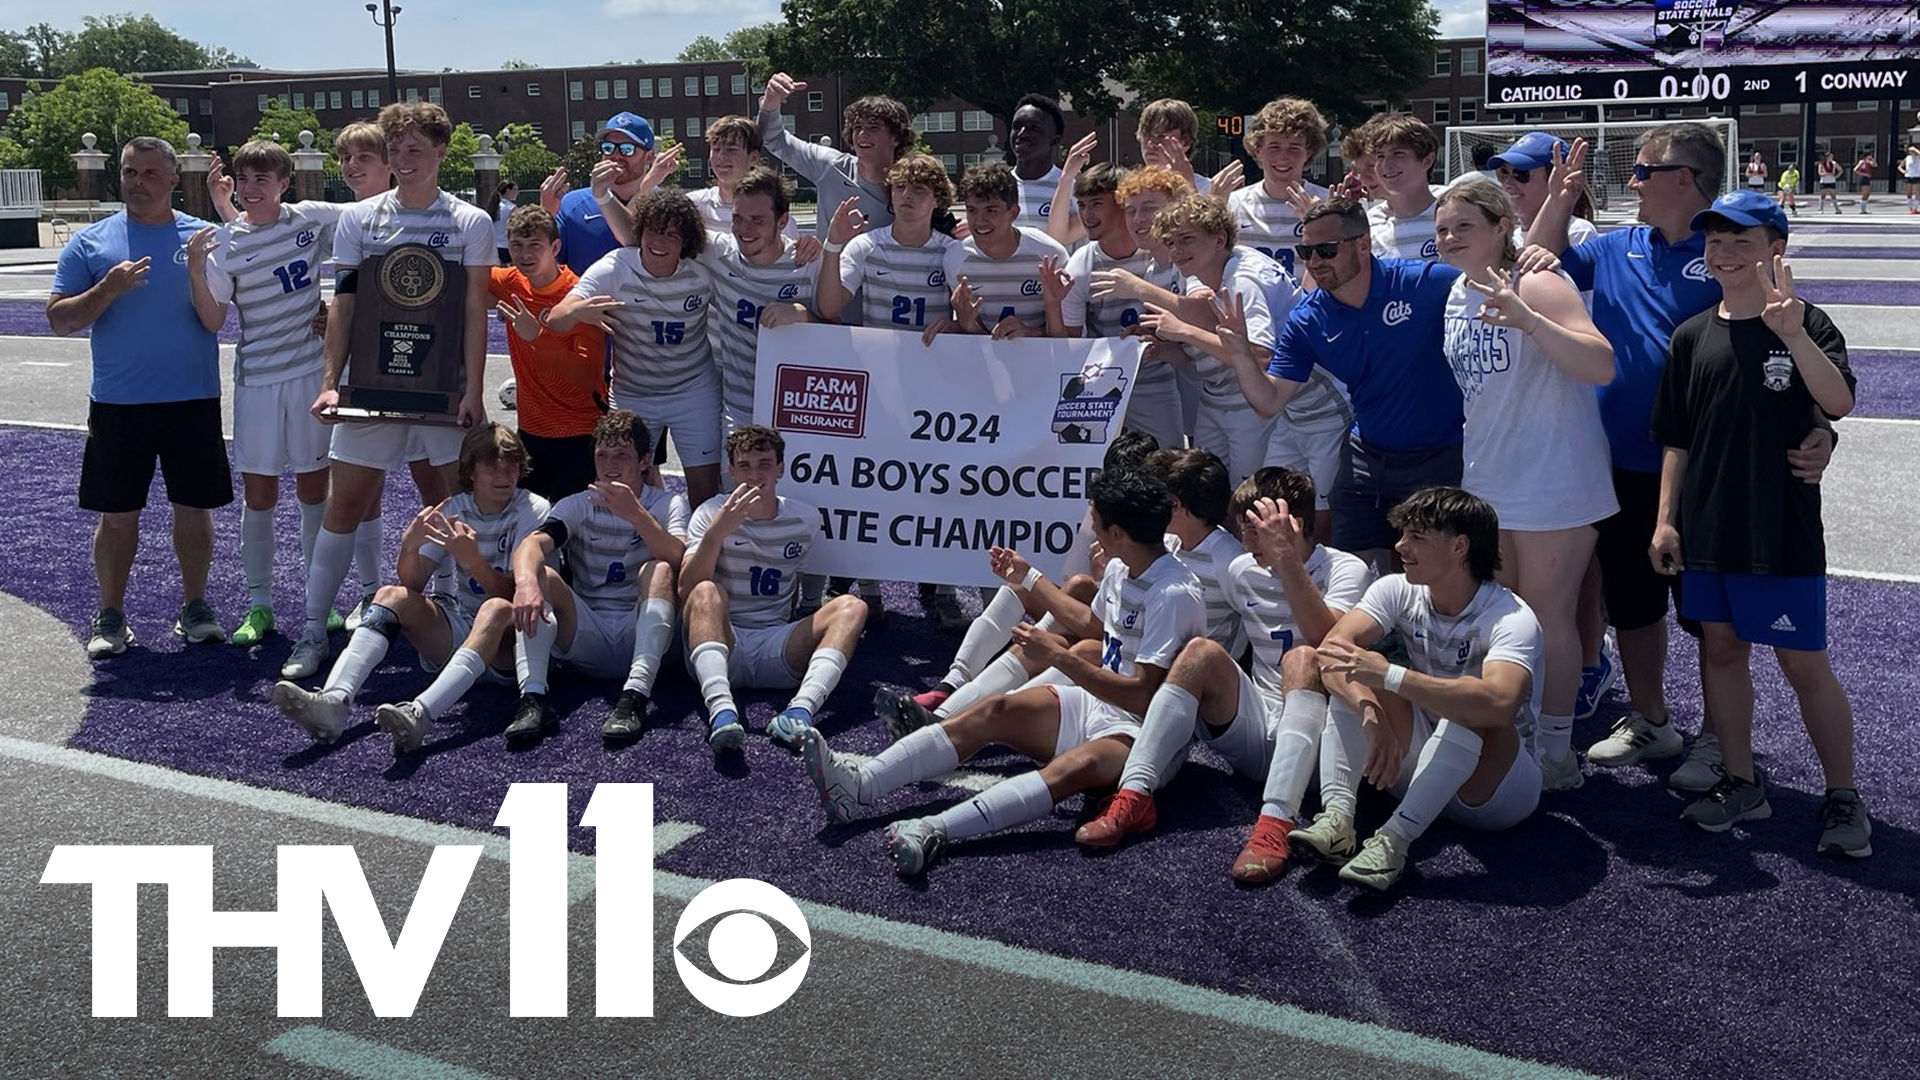 THREE-PEAT! Conway will keep the Class 6A boys soccer crown after outlasting rival Catholic. Senior Noah Schoop scored the Wampus Cats' lone goal and was named MVP.